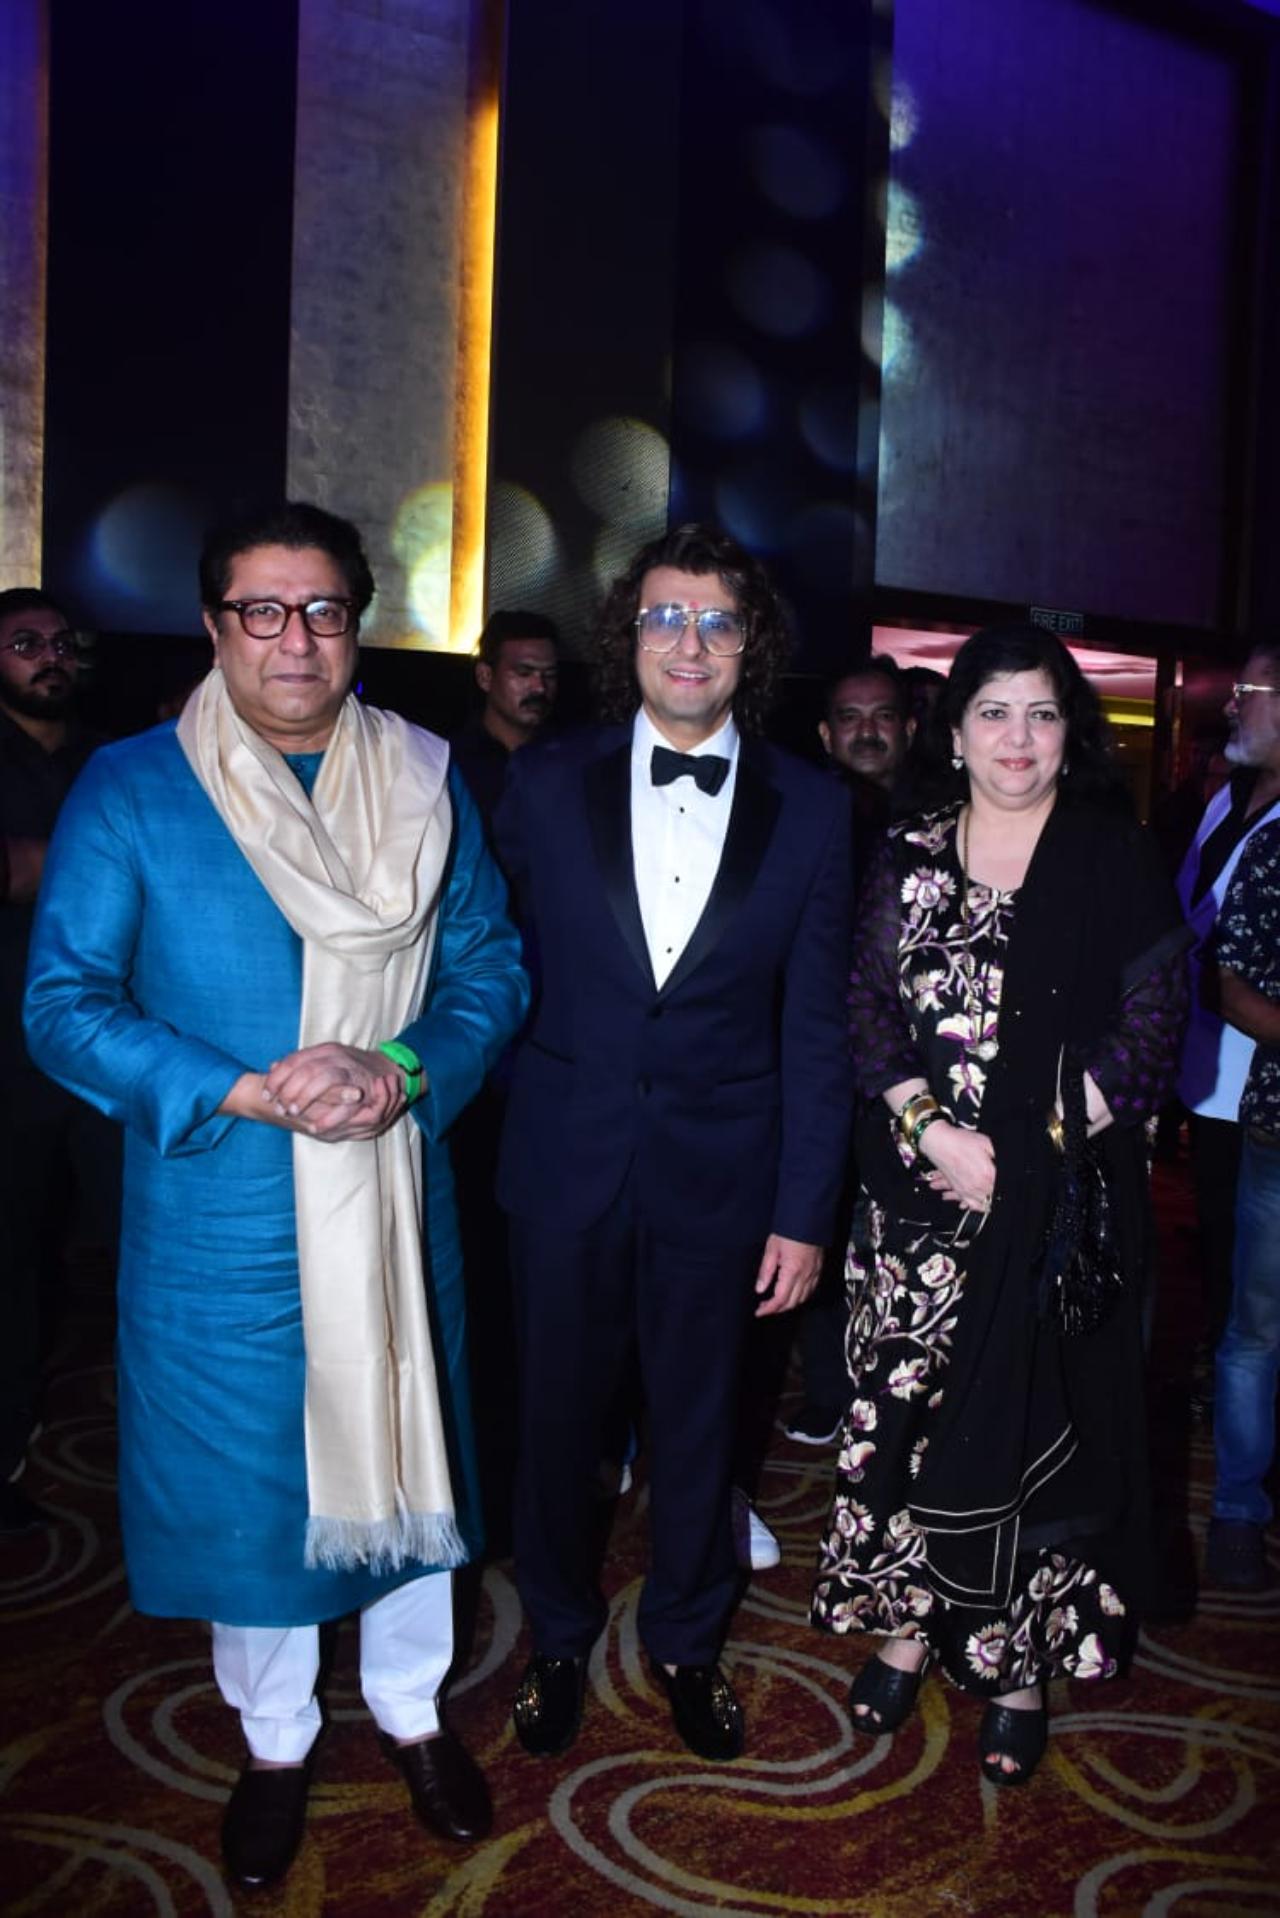 If the event was already high profile, the stakes got even higher when Raj Thackeray and his wife, Sharmila Thackeray pulled into the venue!